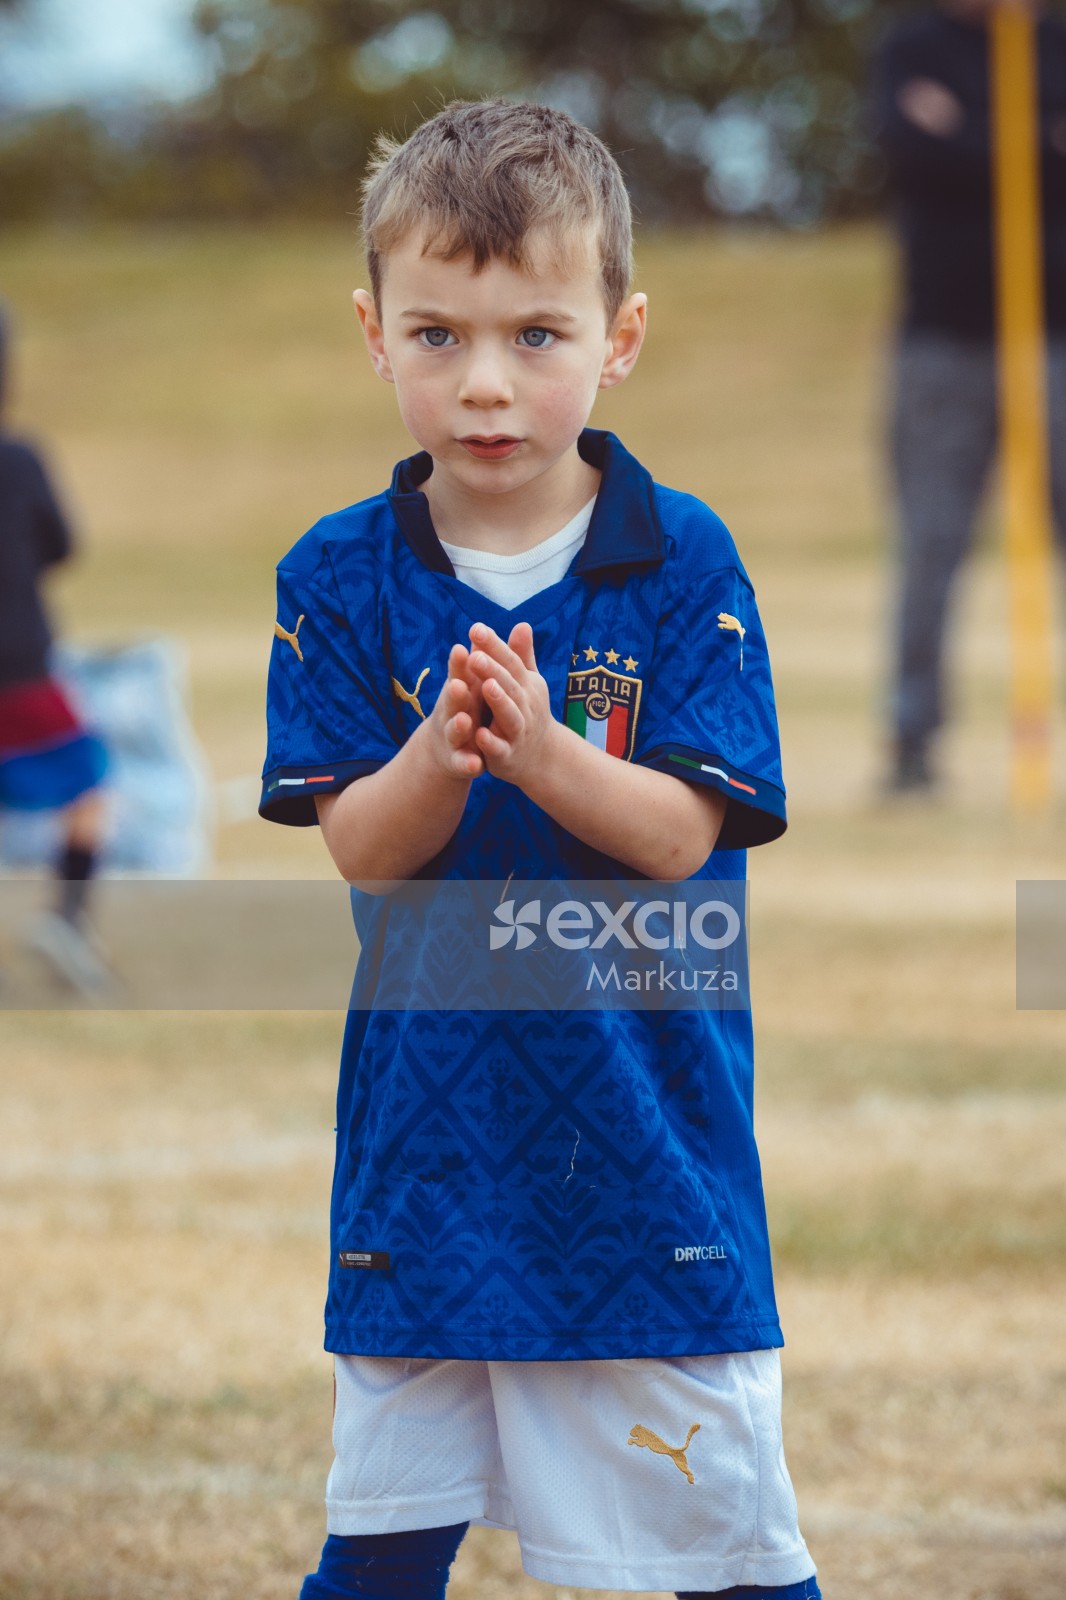 Little blue eyed kid clapping in Italia kit at Little Dribblers soccer game